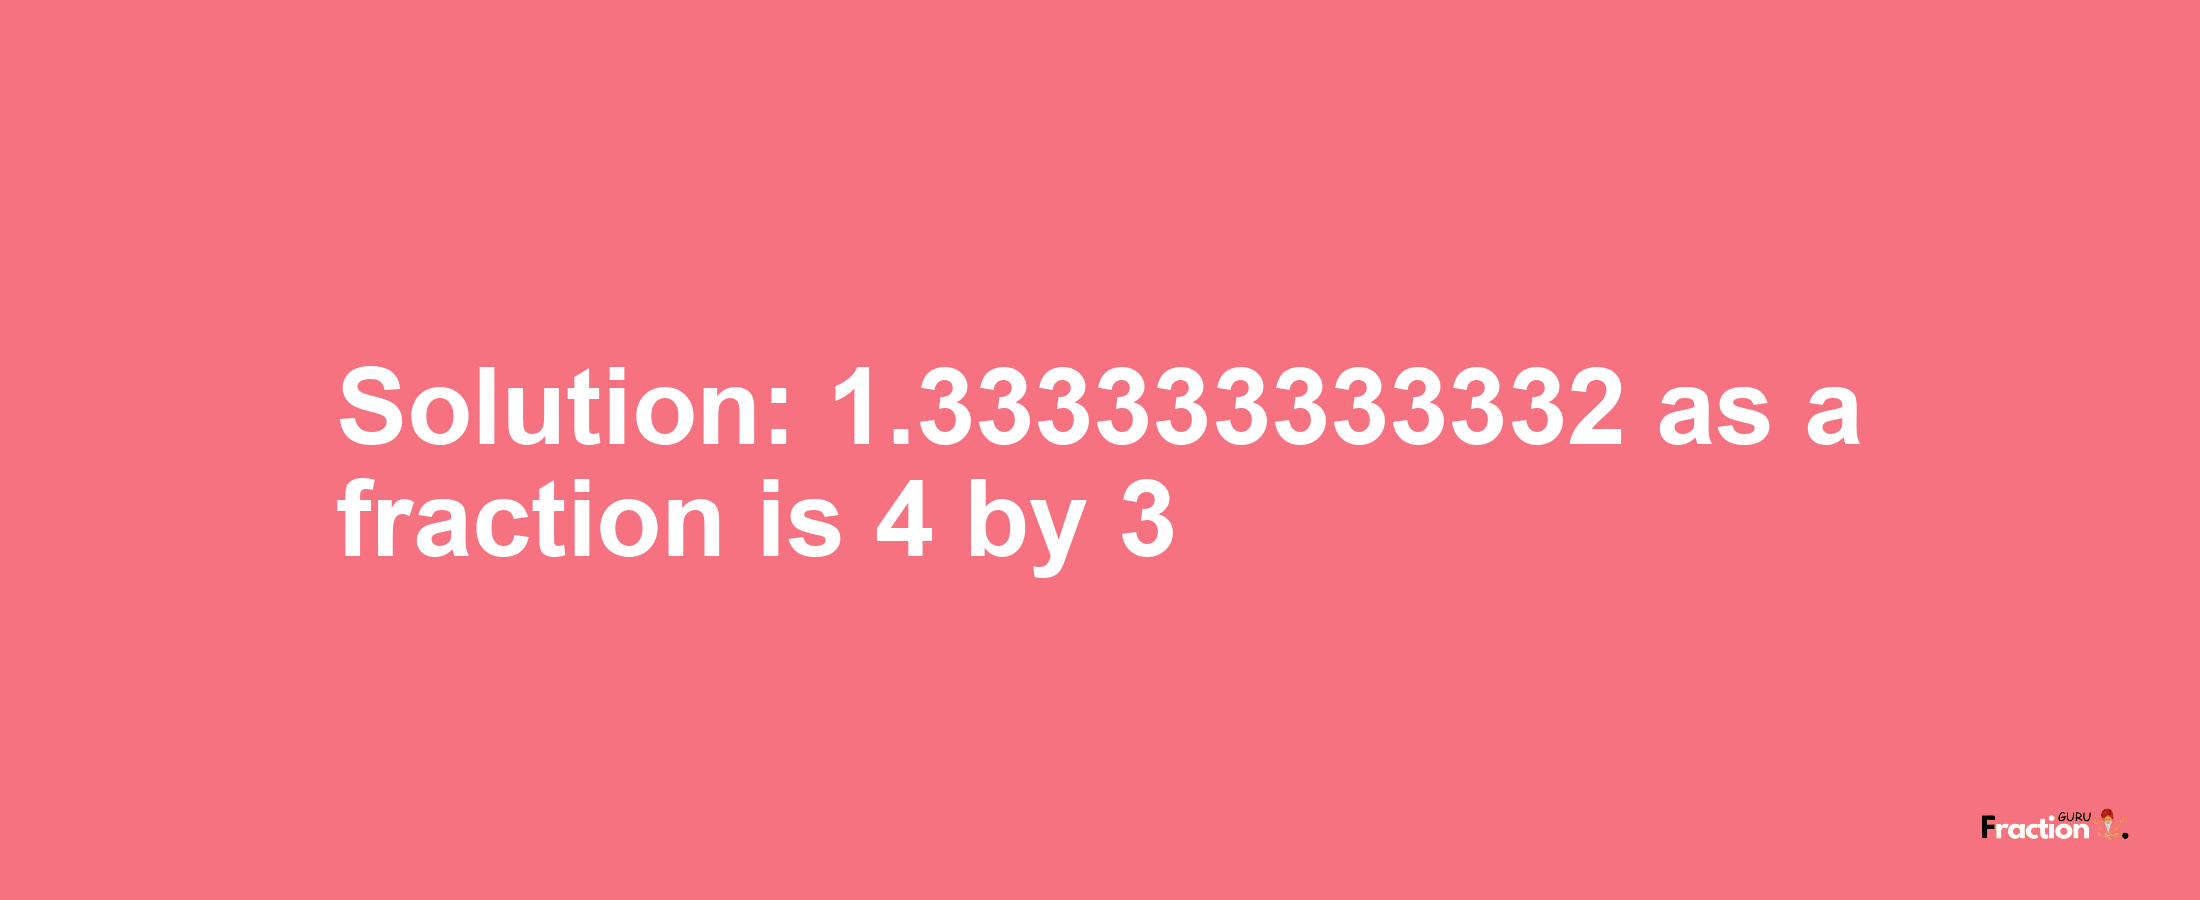 Solution:1.333333333332 as a fraction is 4/3